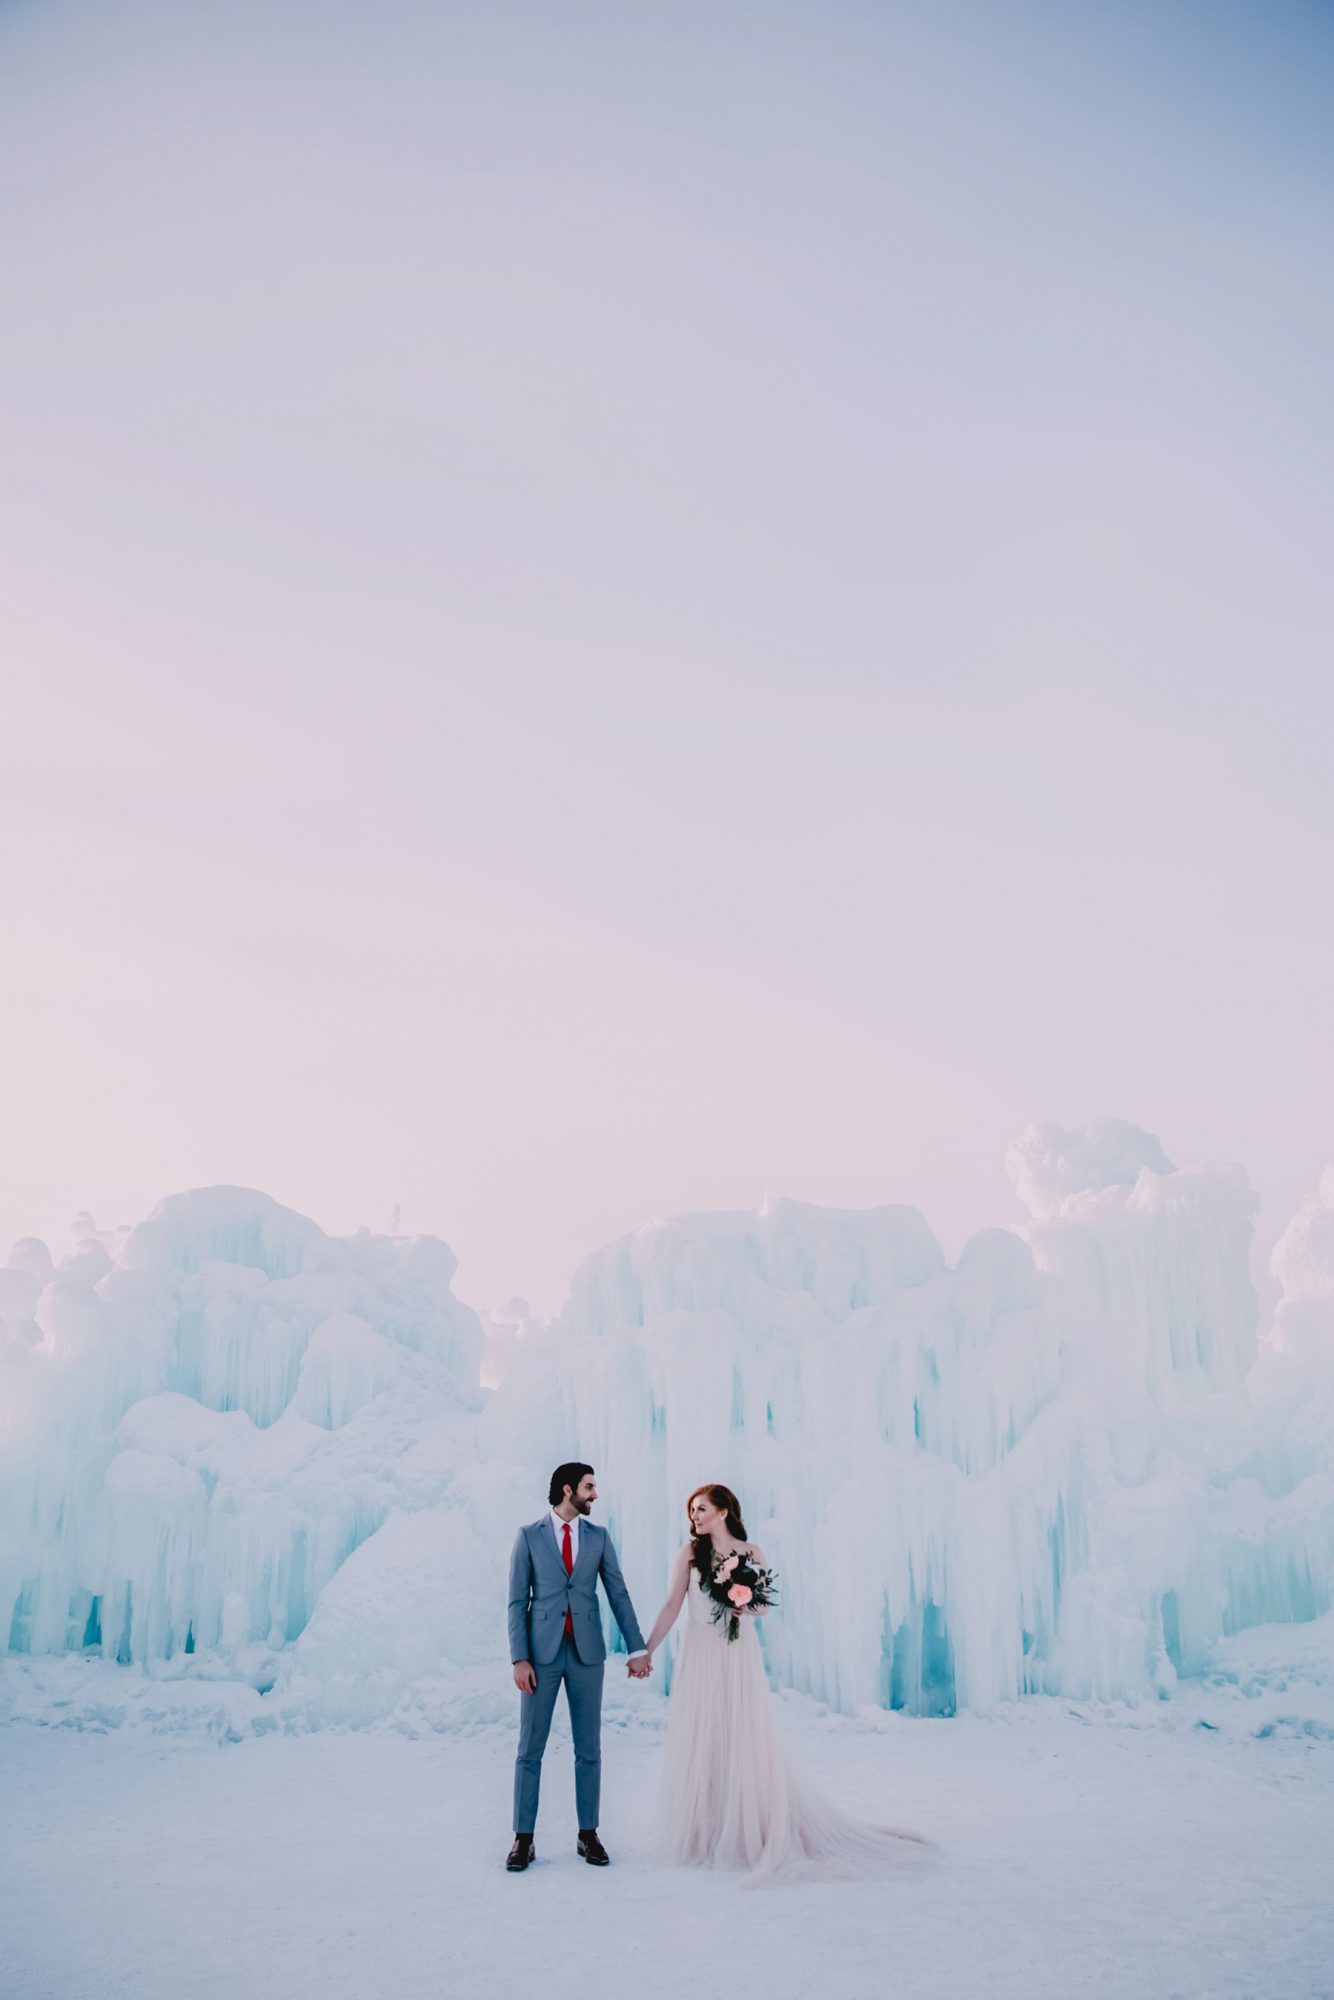 Bride and Groom Posing with Ice Castle